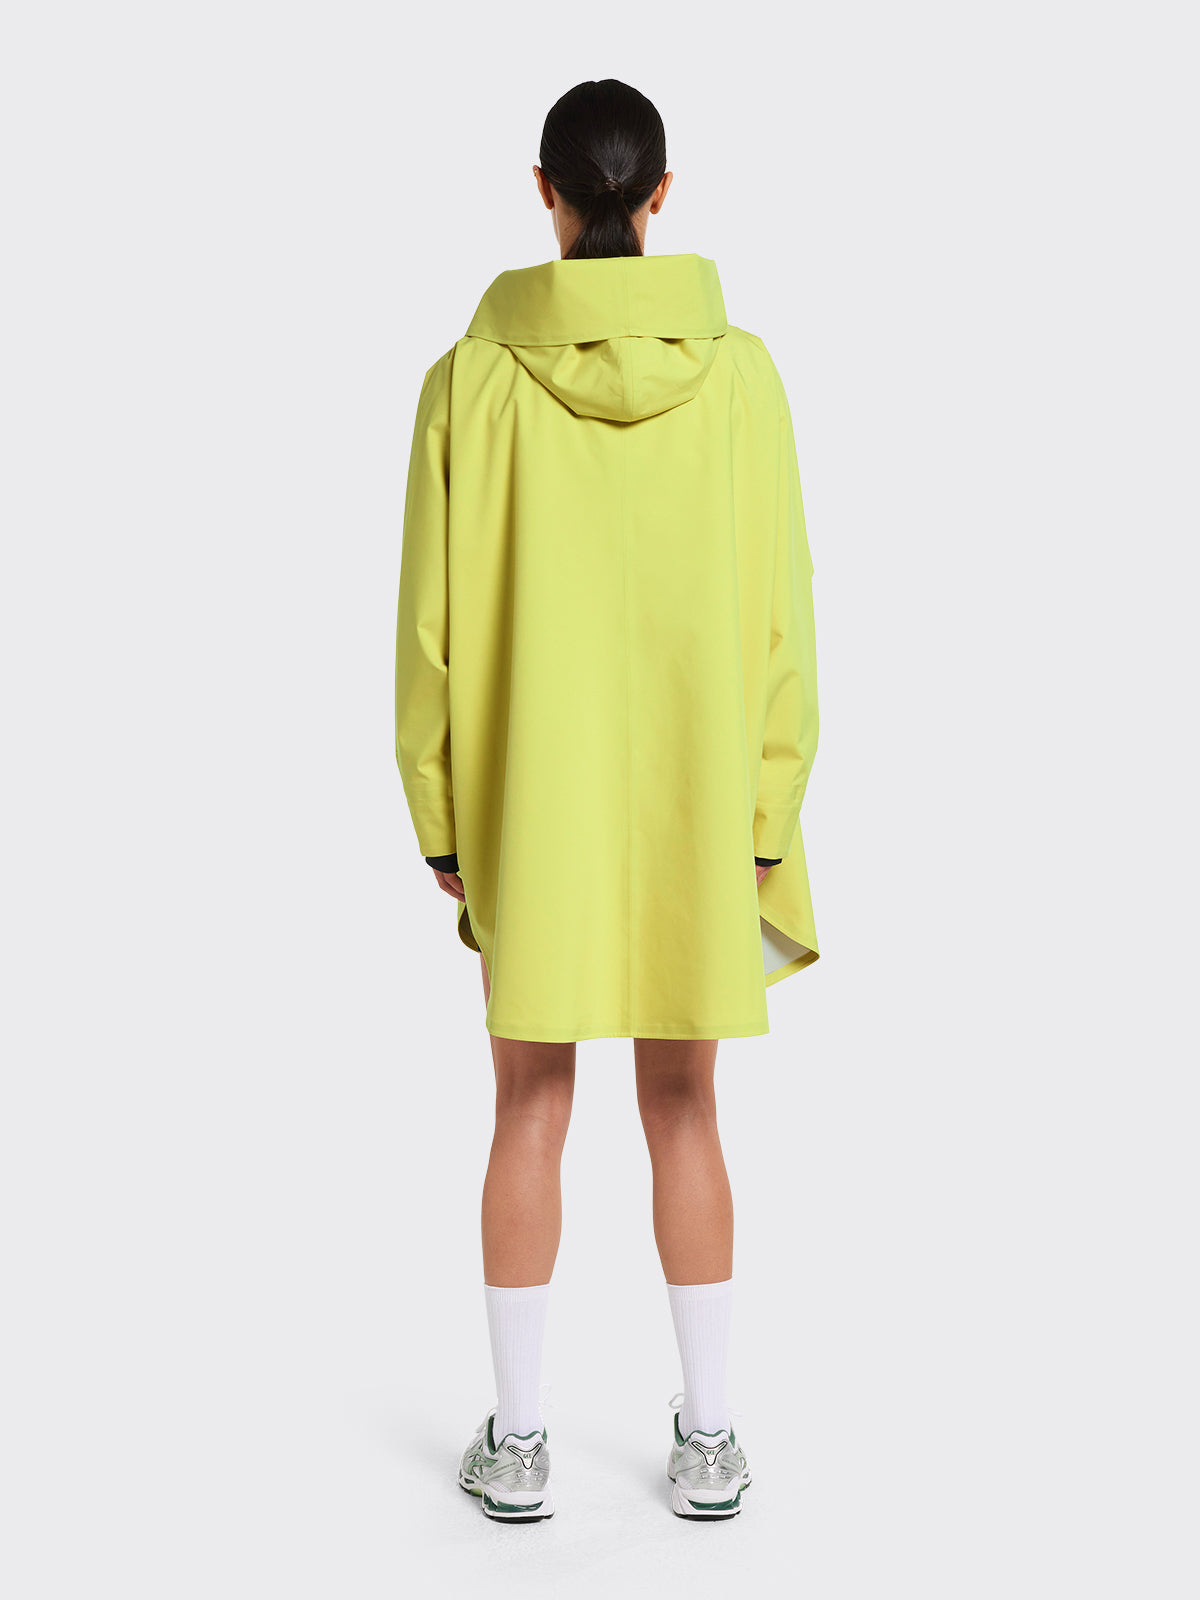 Woman wearing Bergen poncho in the color Muted Lime from Blæst